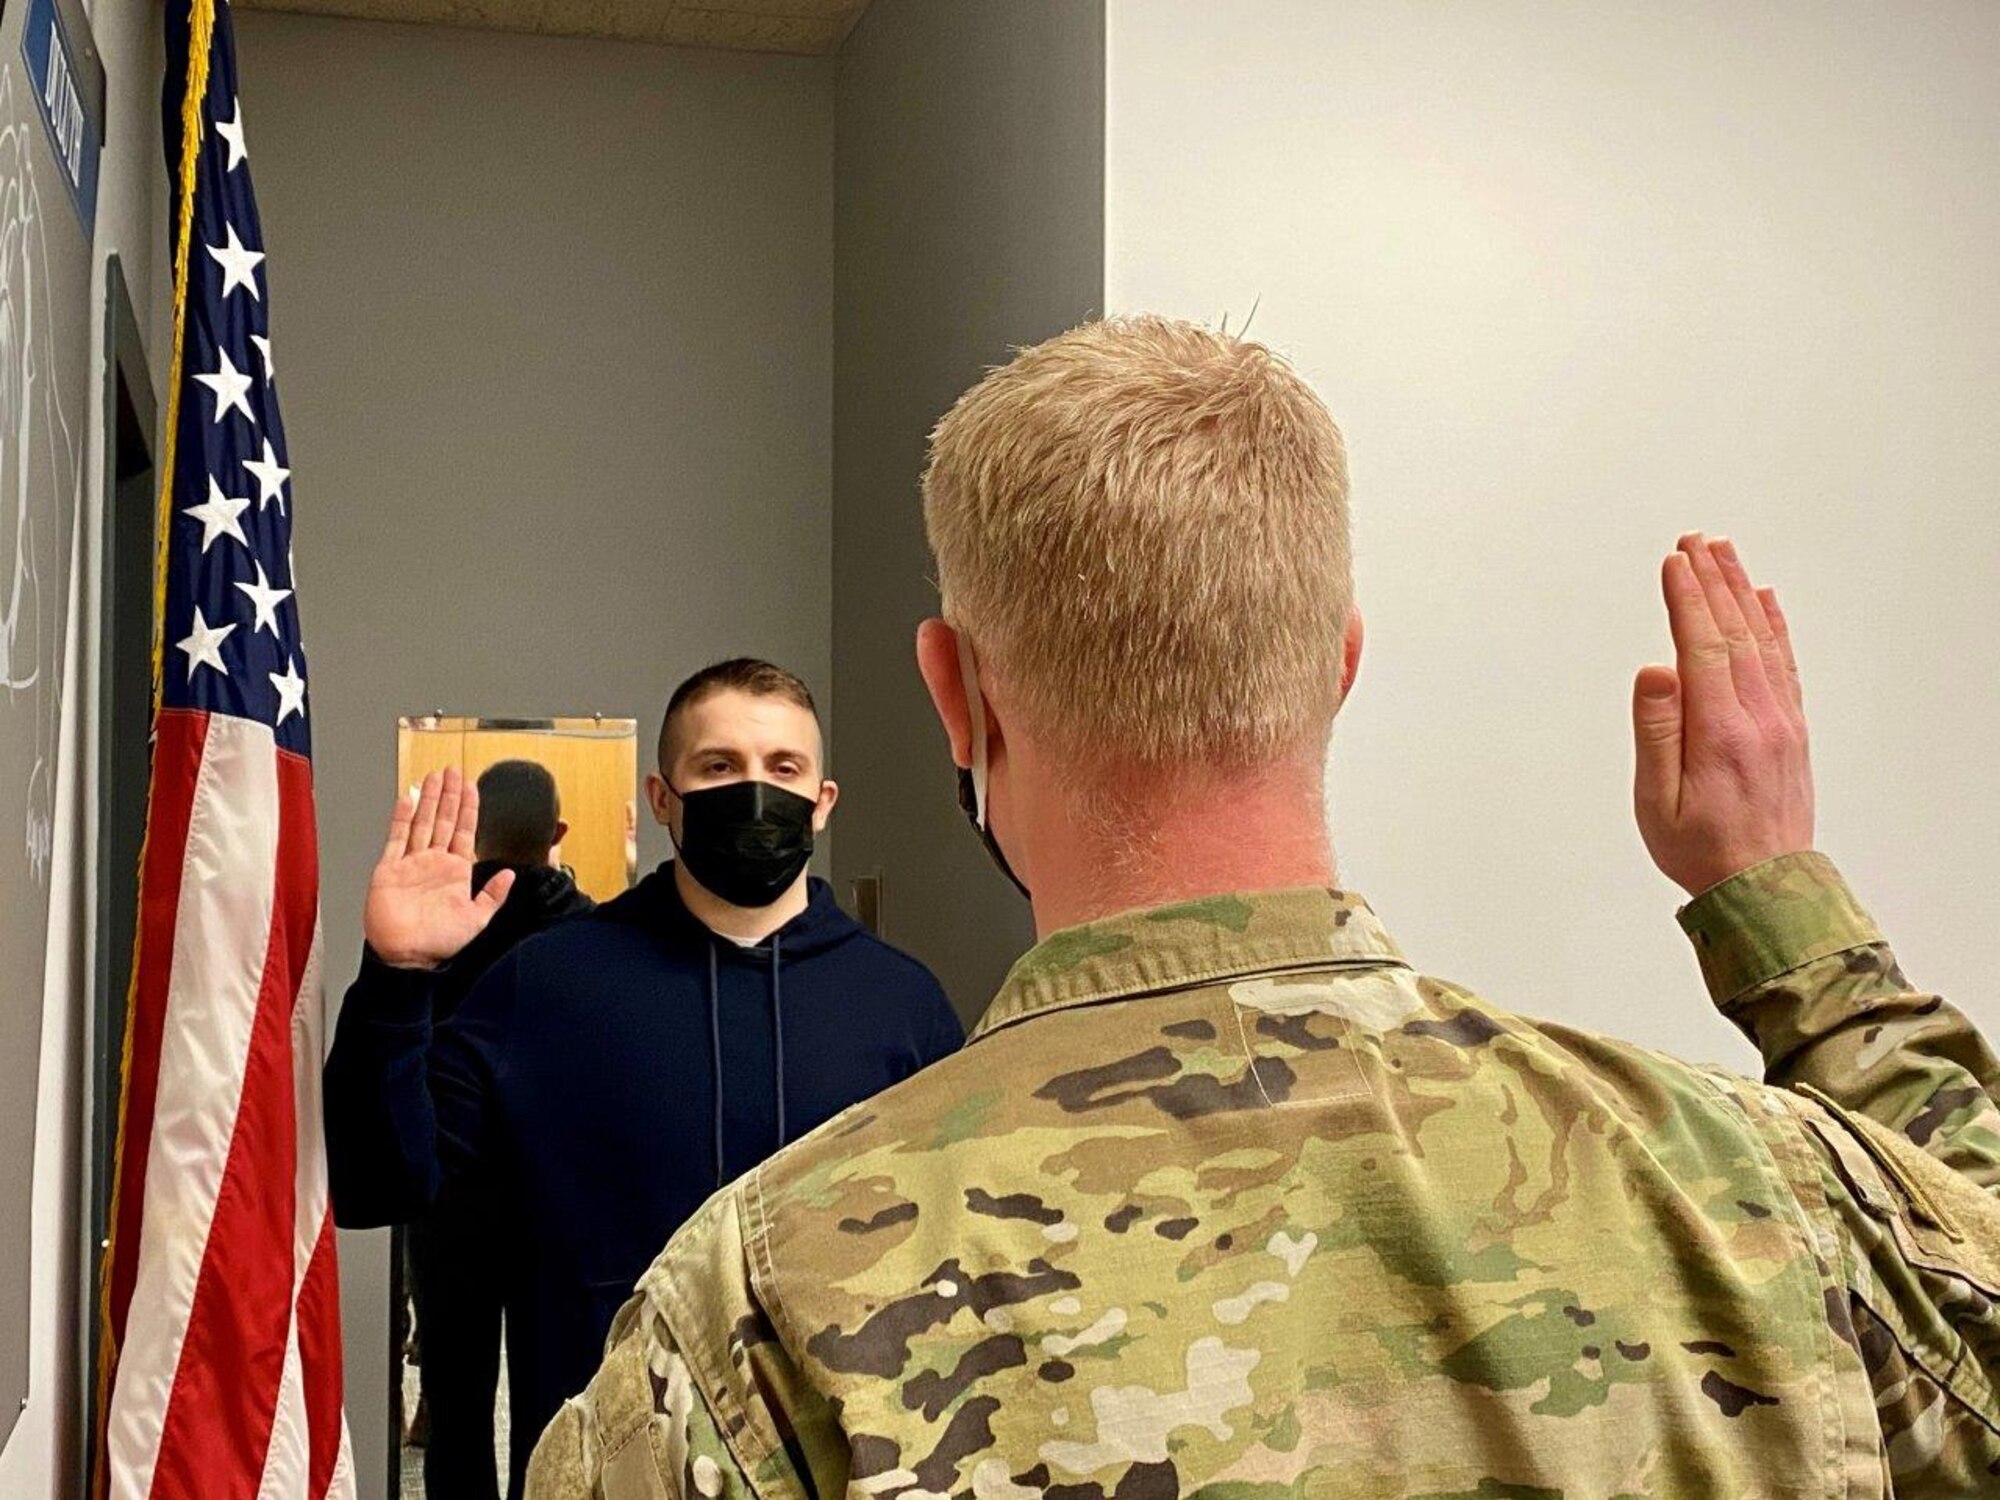 Andy Boso takes the Oath of Enlistment of Feb. 2, 2021.  Boso elected the Aircraft Armament Systems career field.  (U.S. Air National Guard photo by Audra Flanagan